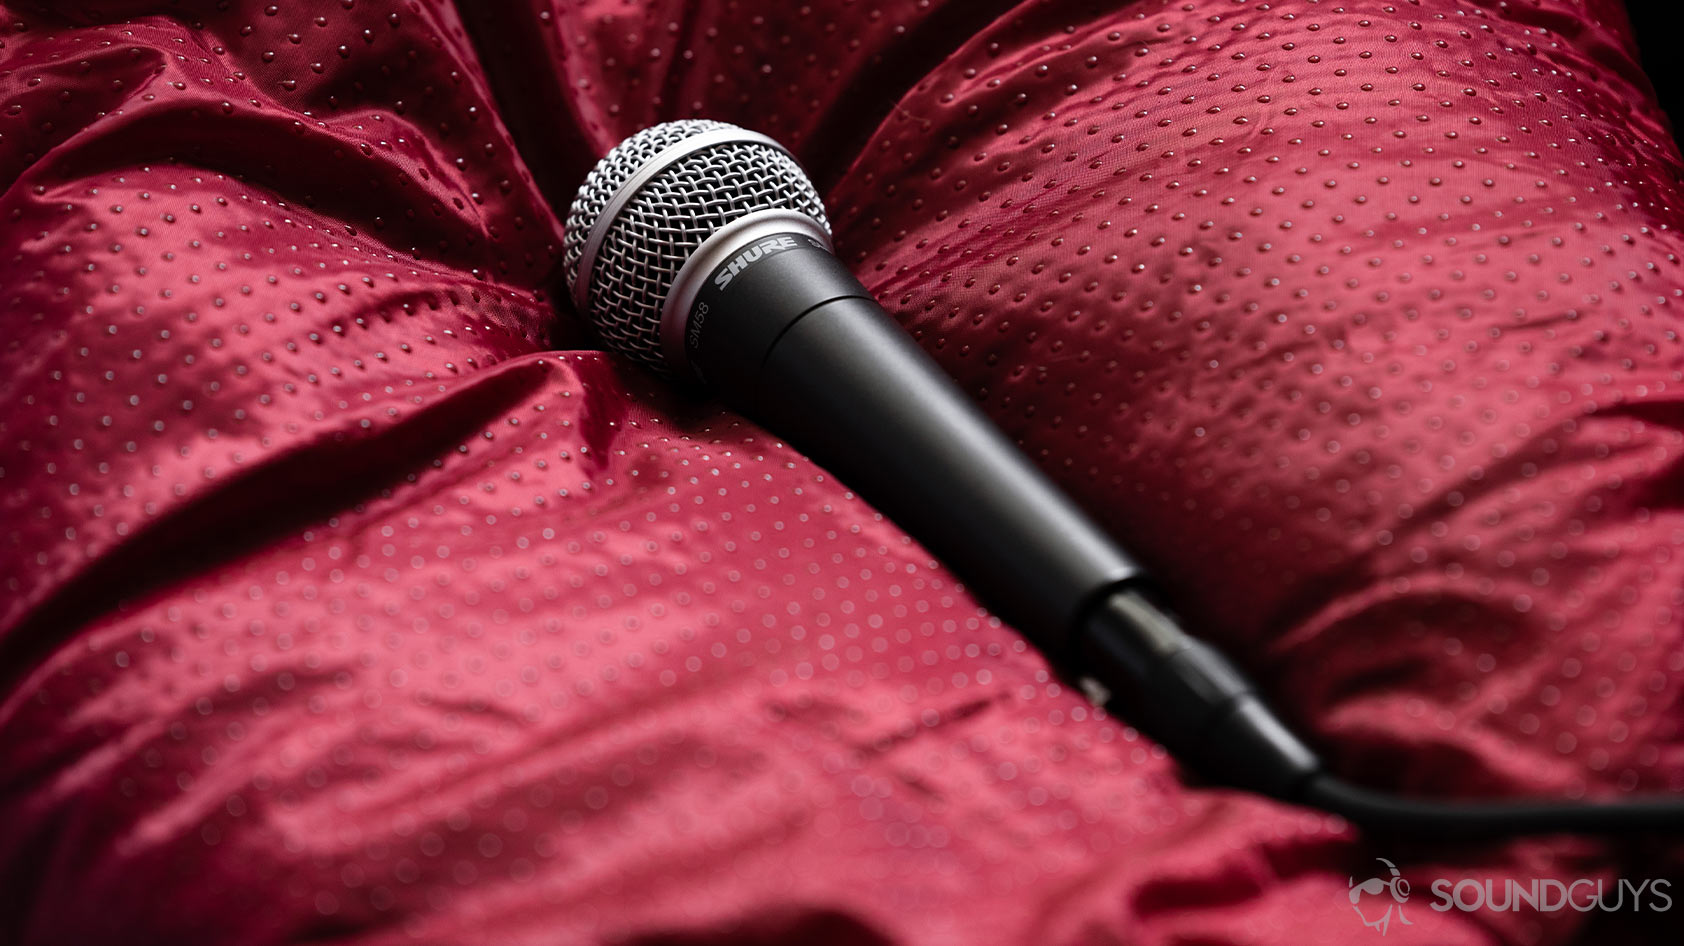 Shure SM58 dynamic microphone on red surface.